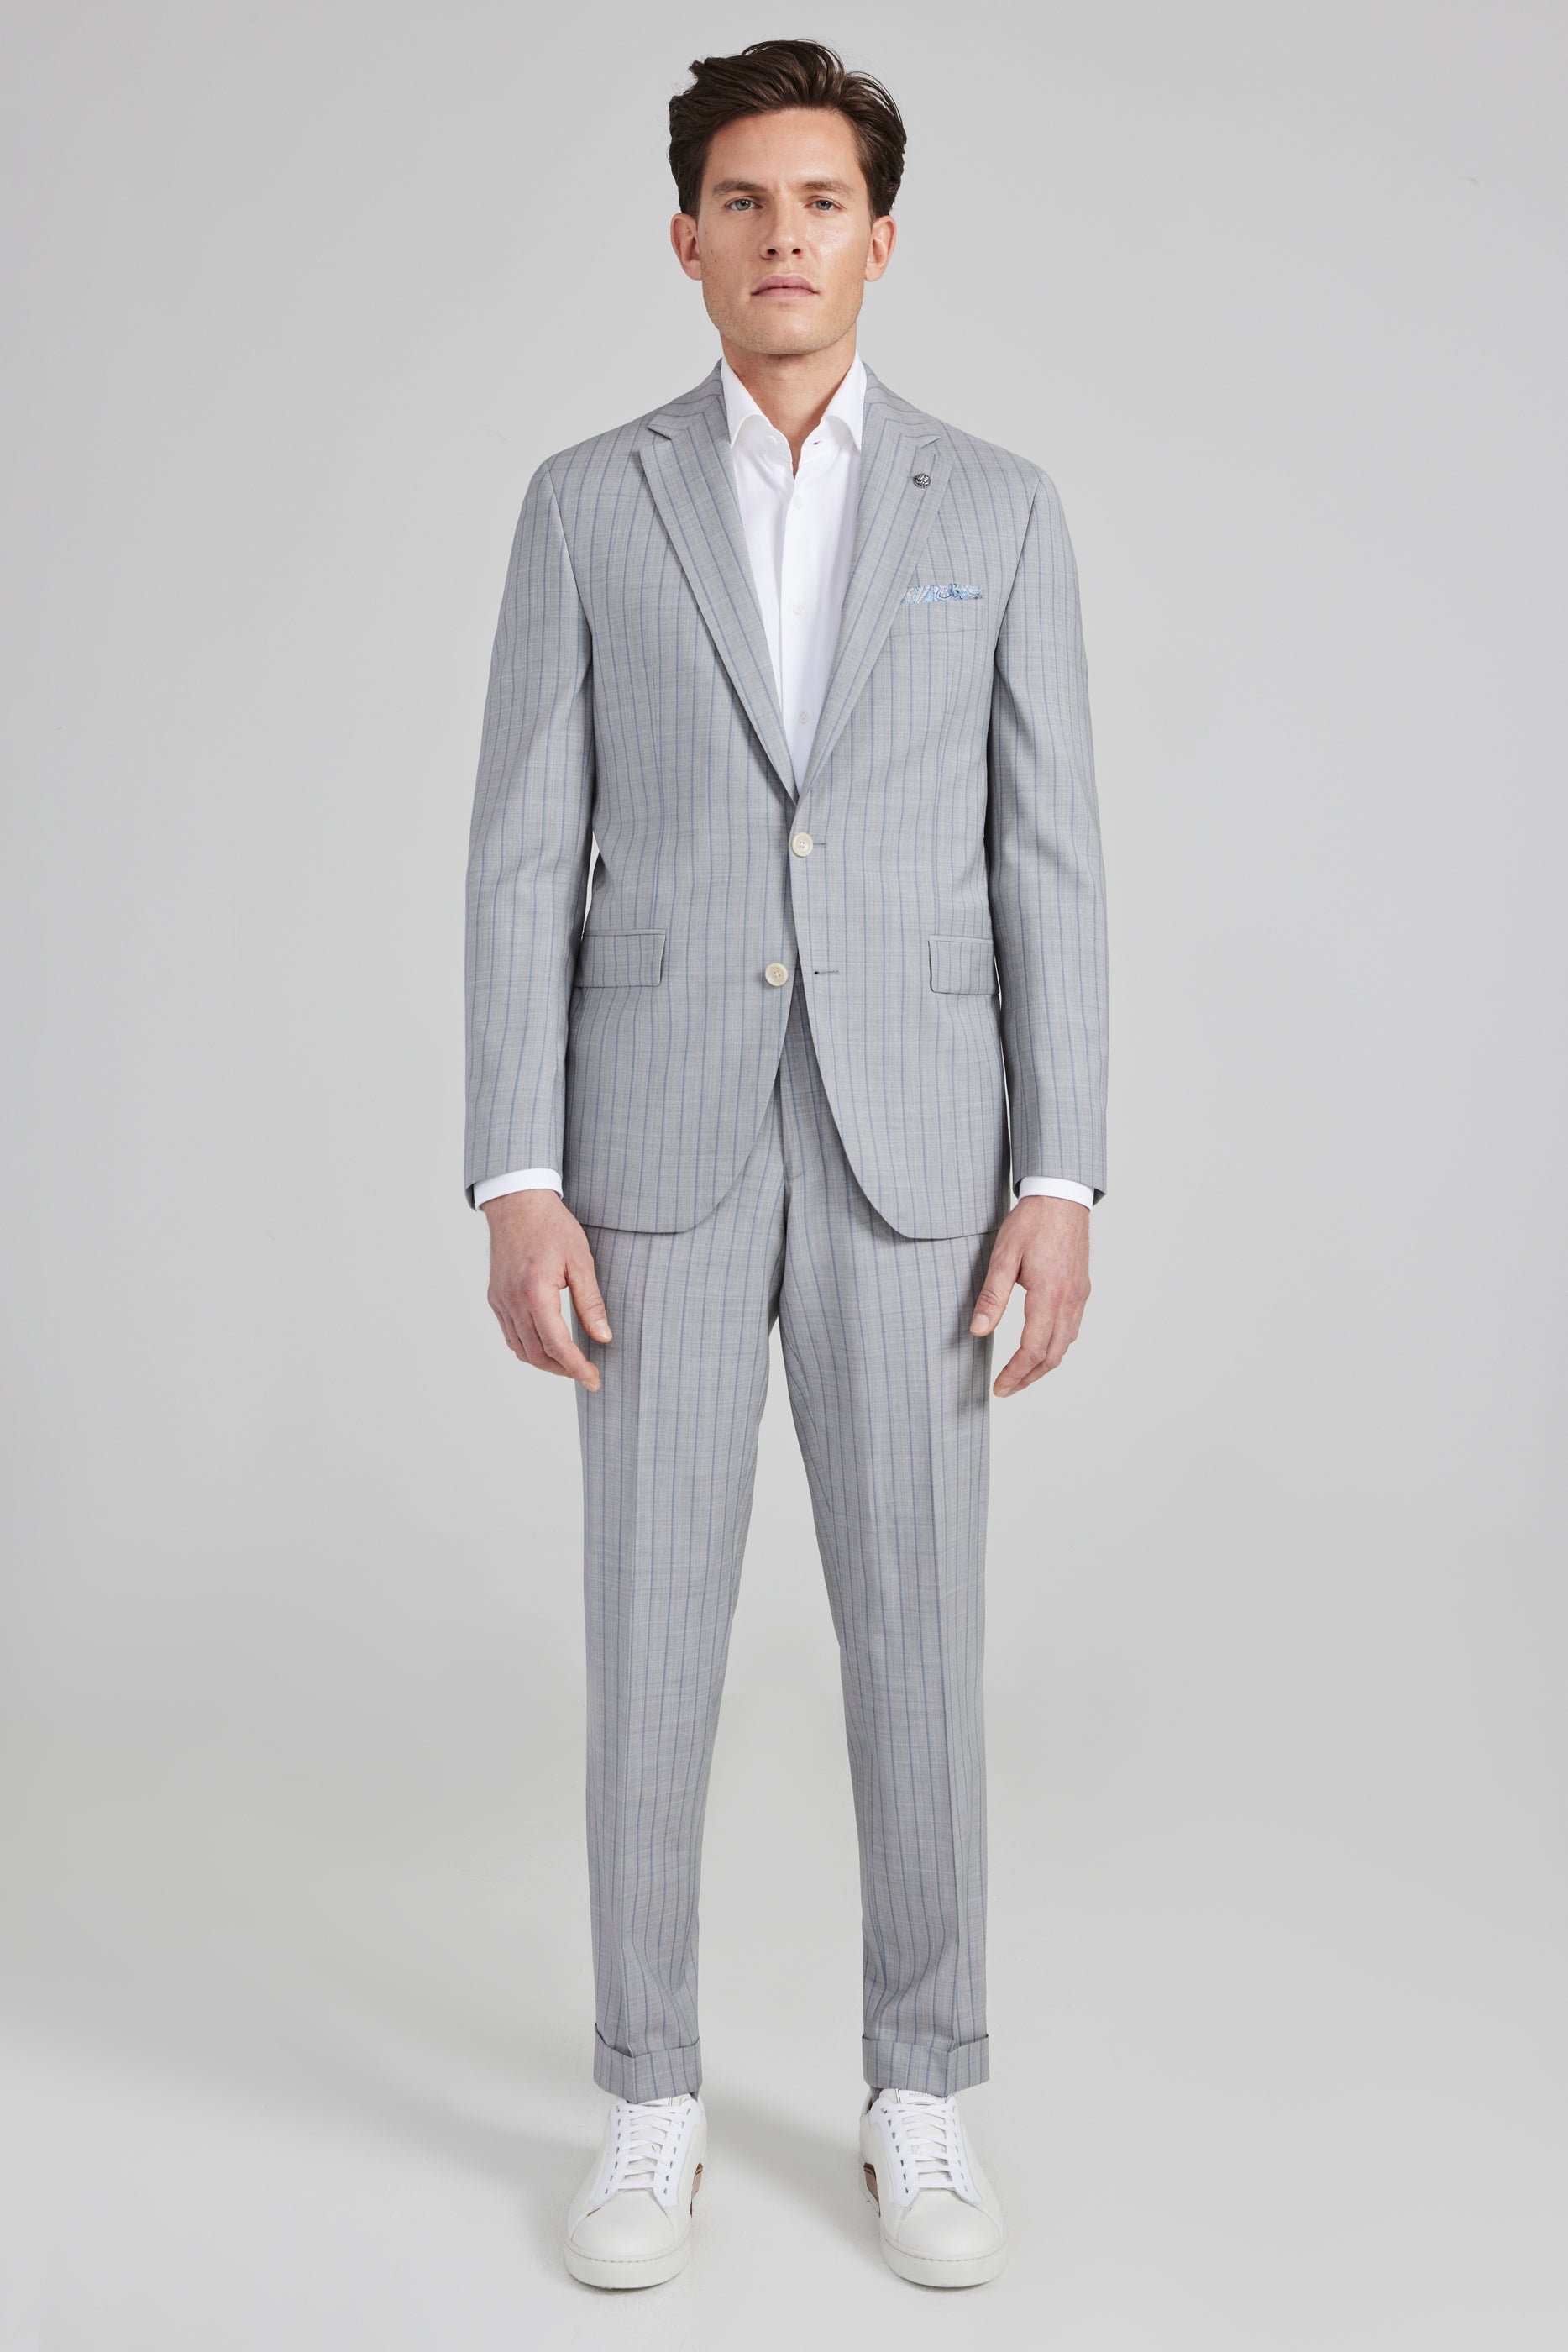 Alt view 3 Esprit Pinstripe Wool Suit in Light Grey and Blue